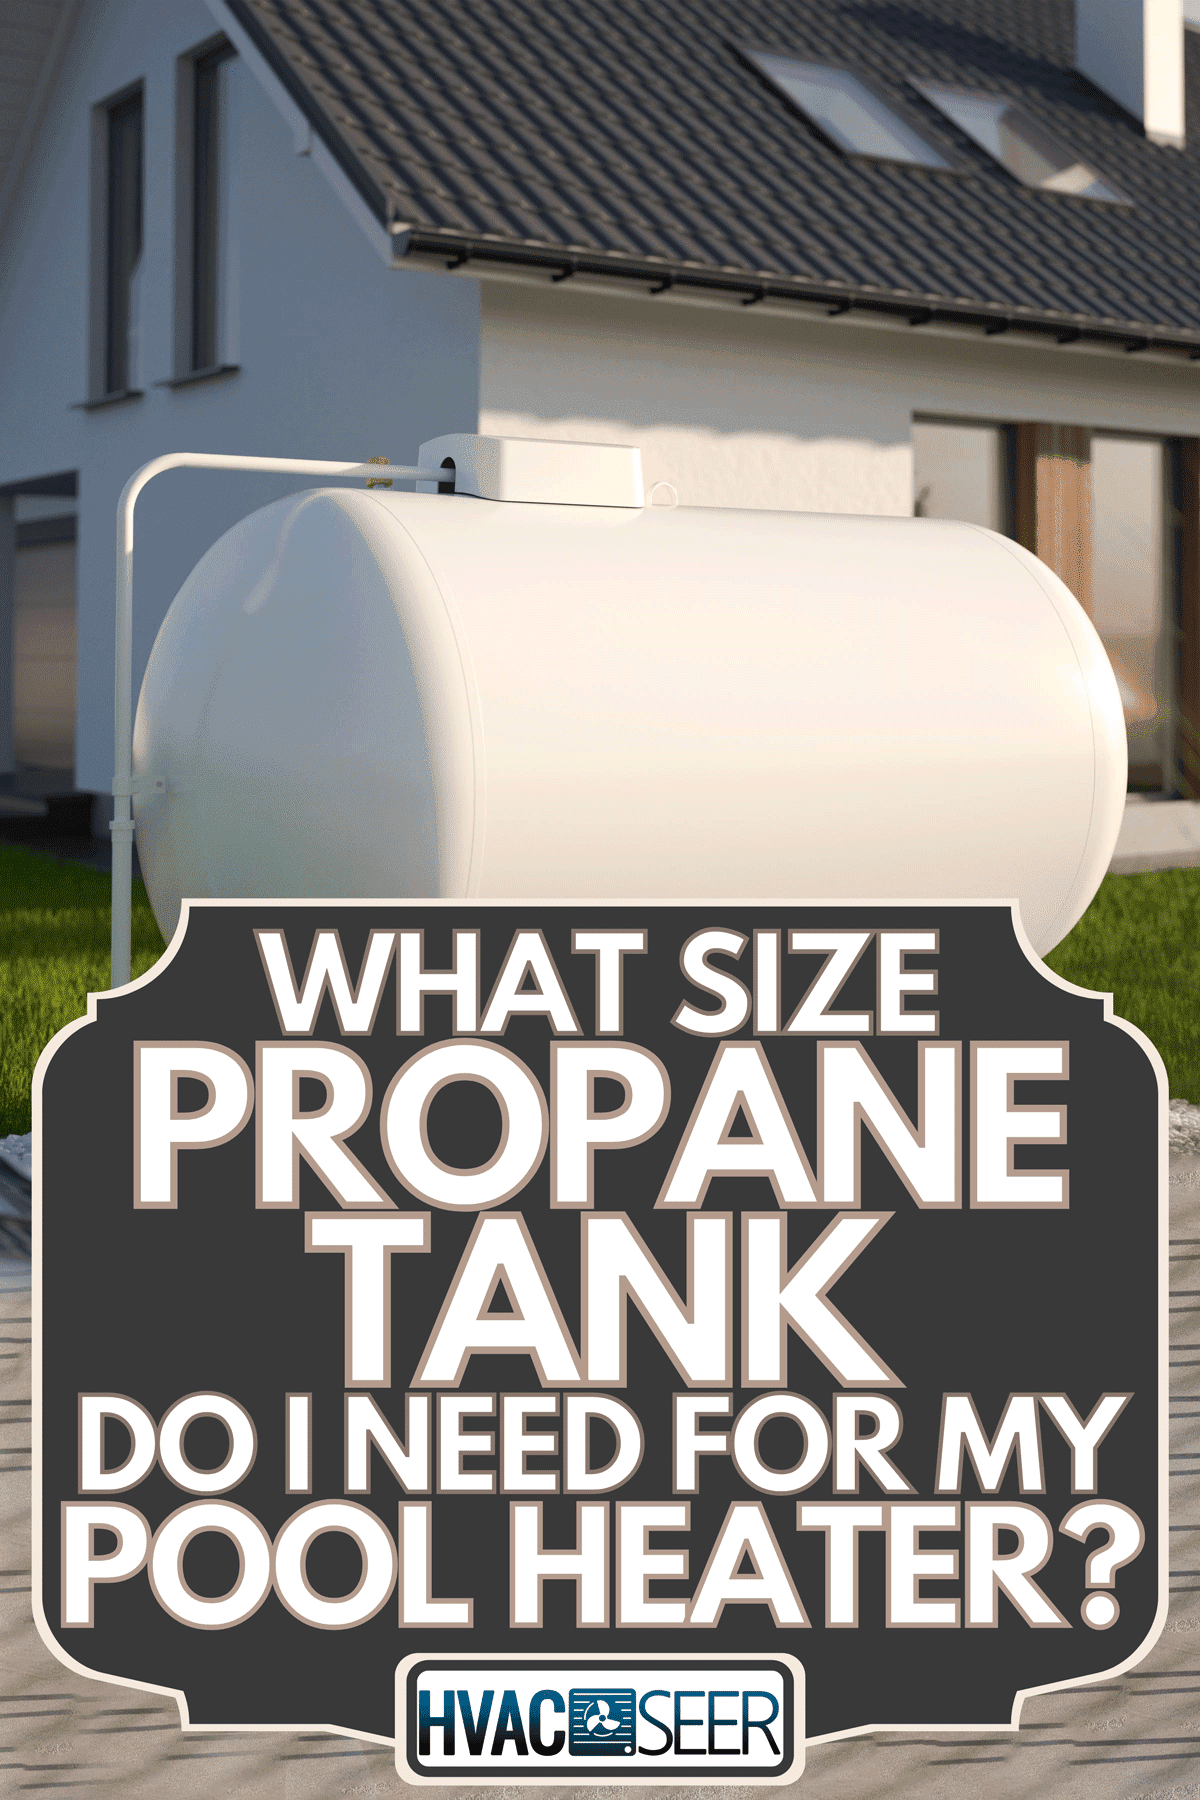 A propane gas tank near house, What Size Propane Tank Do I Need For My Pool Heater?